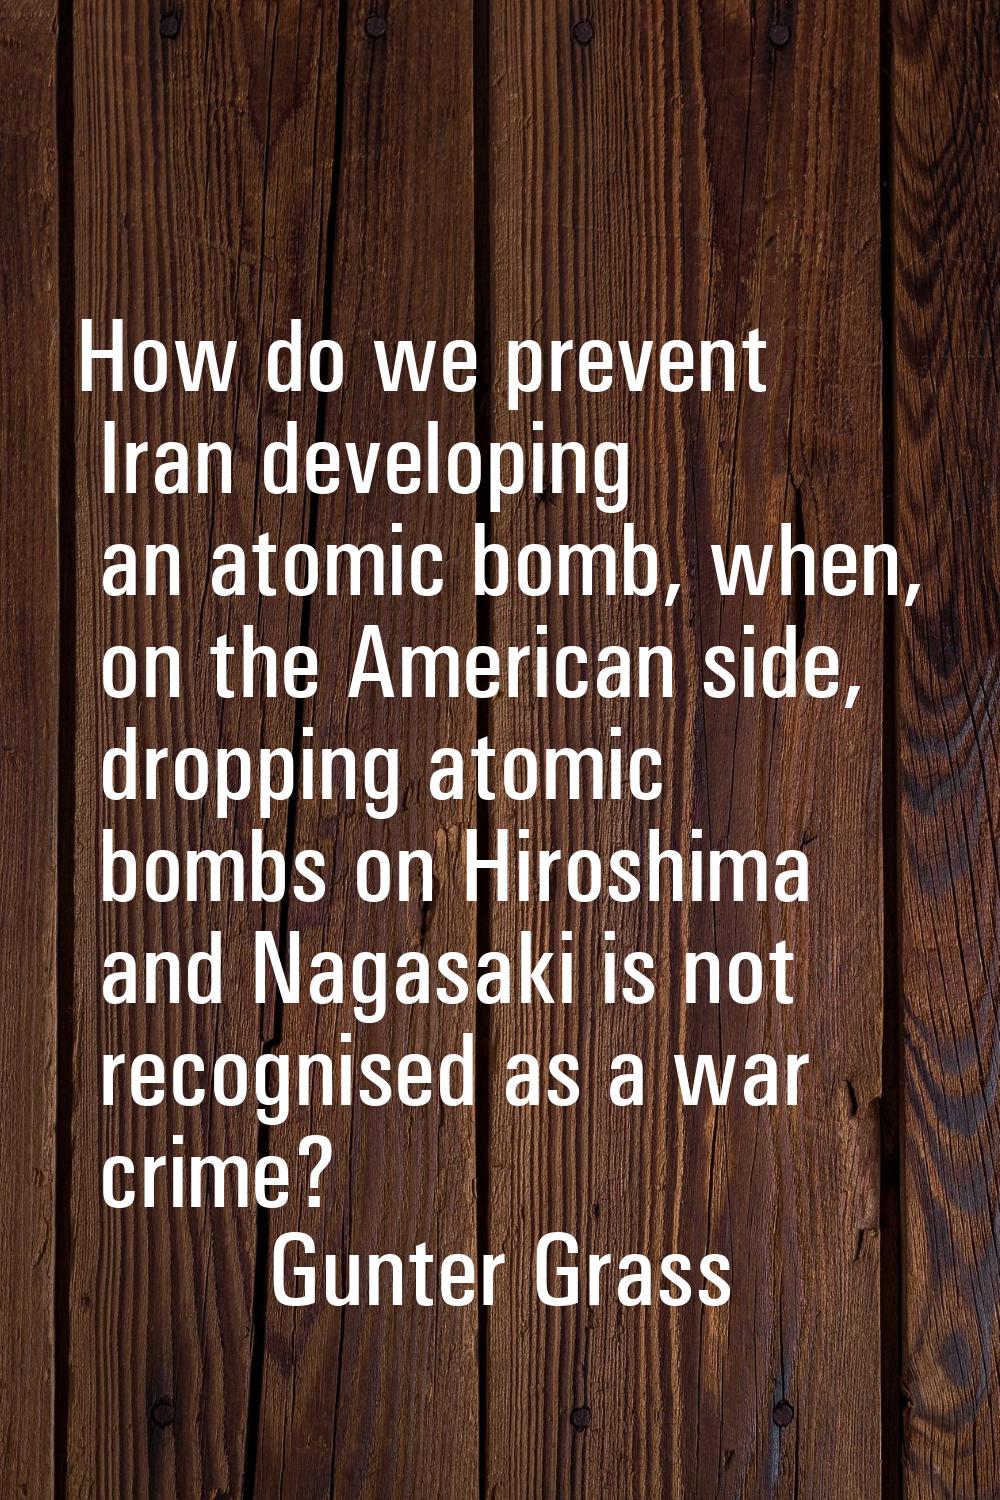 How do we prevent Iran developing an atomic bomb, when, on the American side, dropping atomic bombs